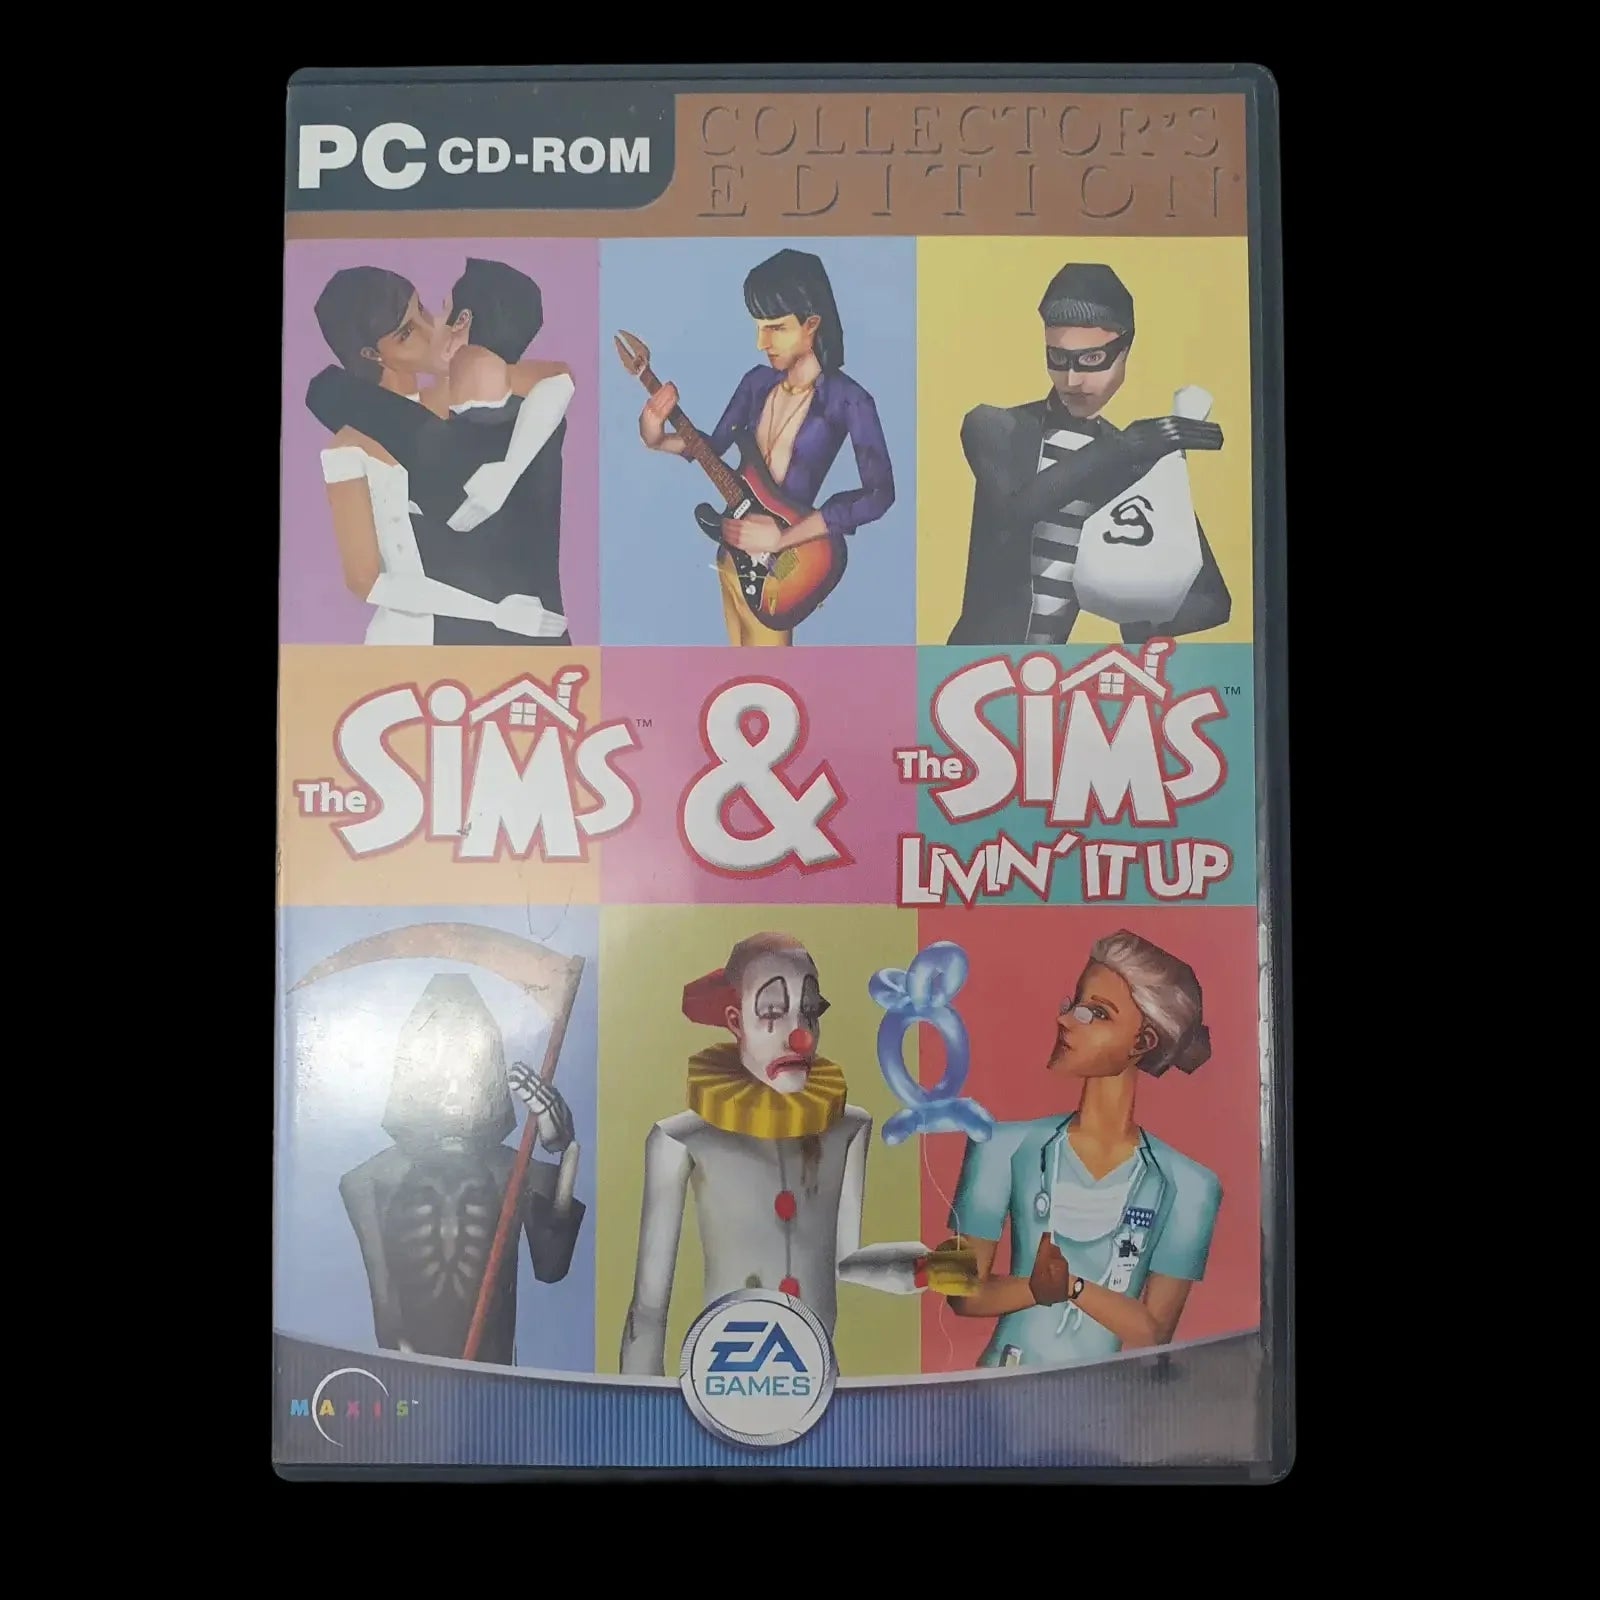 The Sims & Livin It Up Pc Ea Games 2001 Cib Video Game - EA